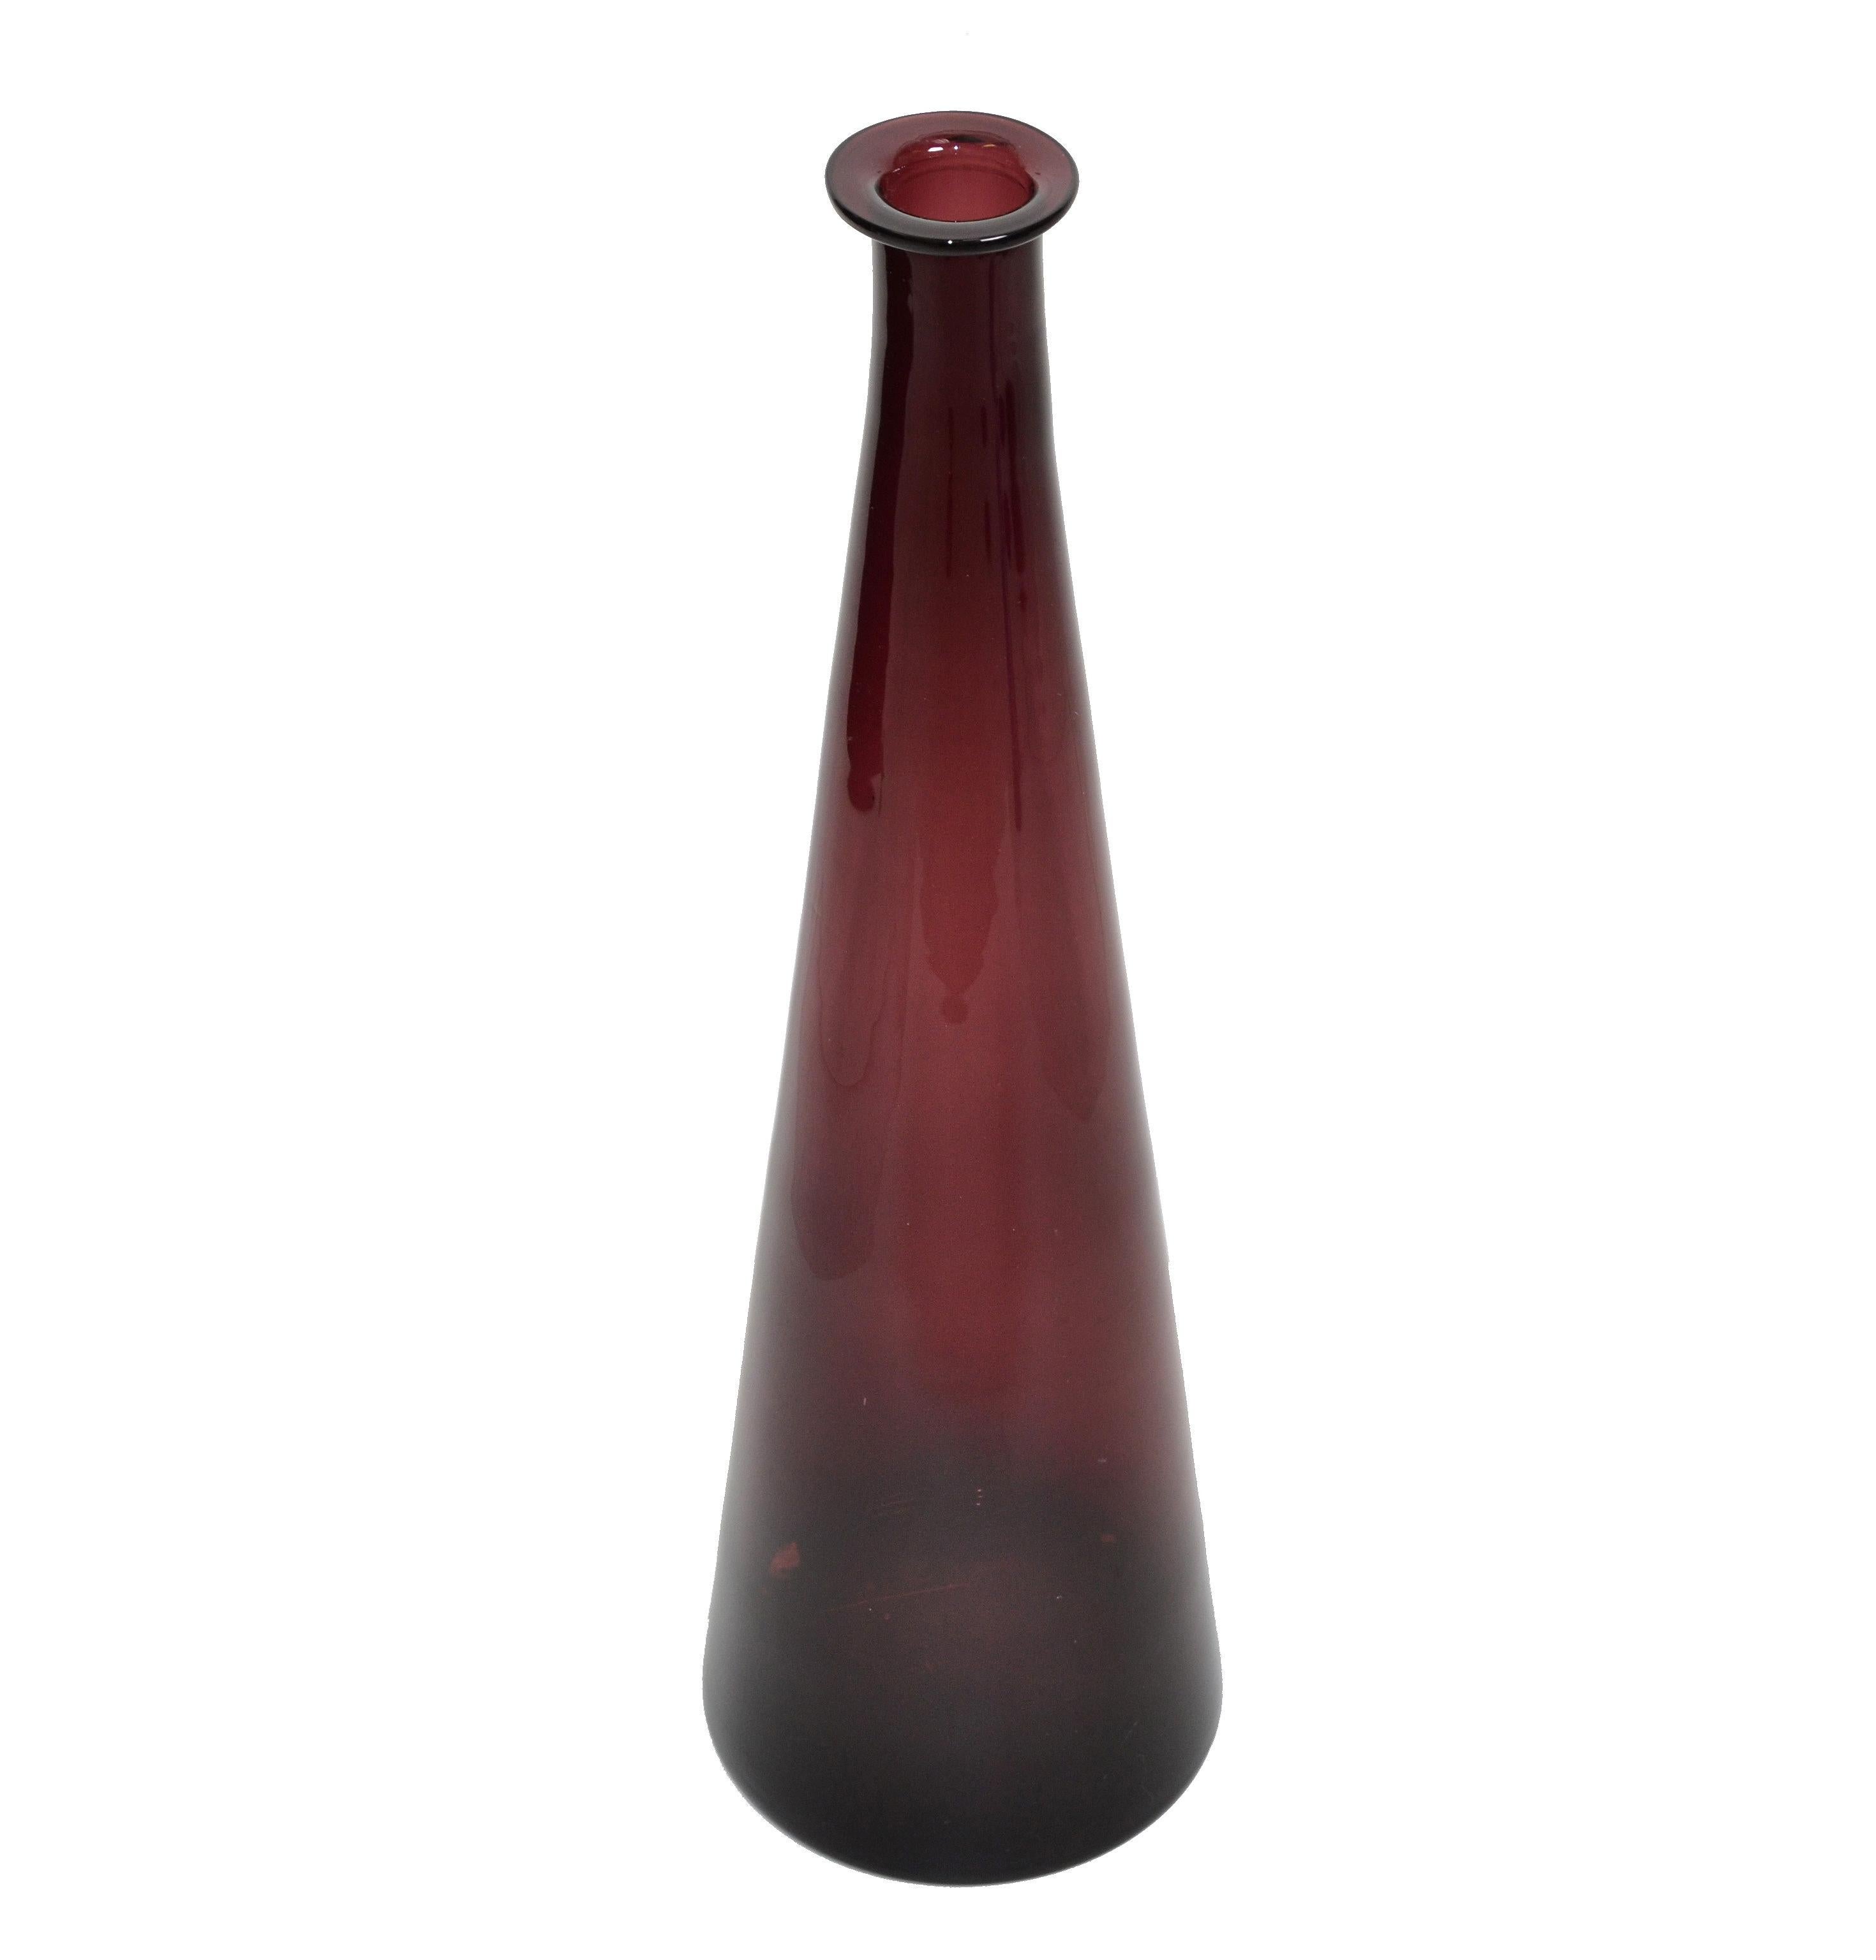 Italian Mid-Century Modern tall blown glass vase, vessel, decanter in translucent amethyst purple from Italy made in the late 1970s.
Amethyst purple is a shade that captivates the imagination and inspires.
Original Foil Label underneath.
This